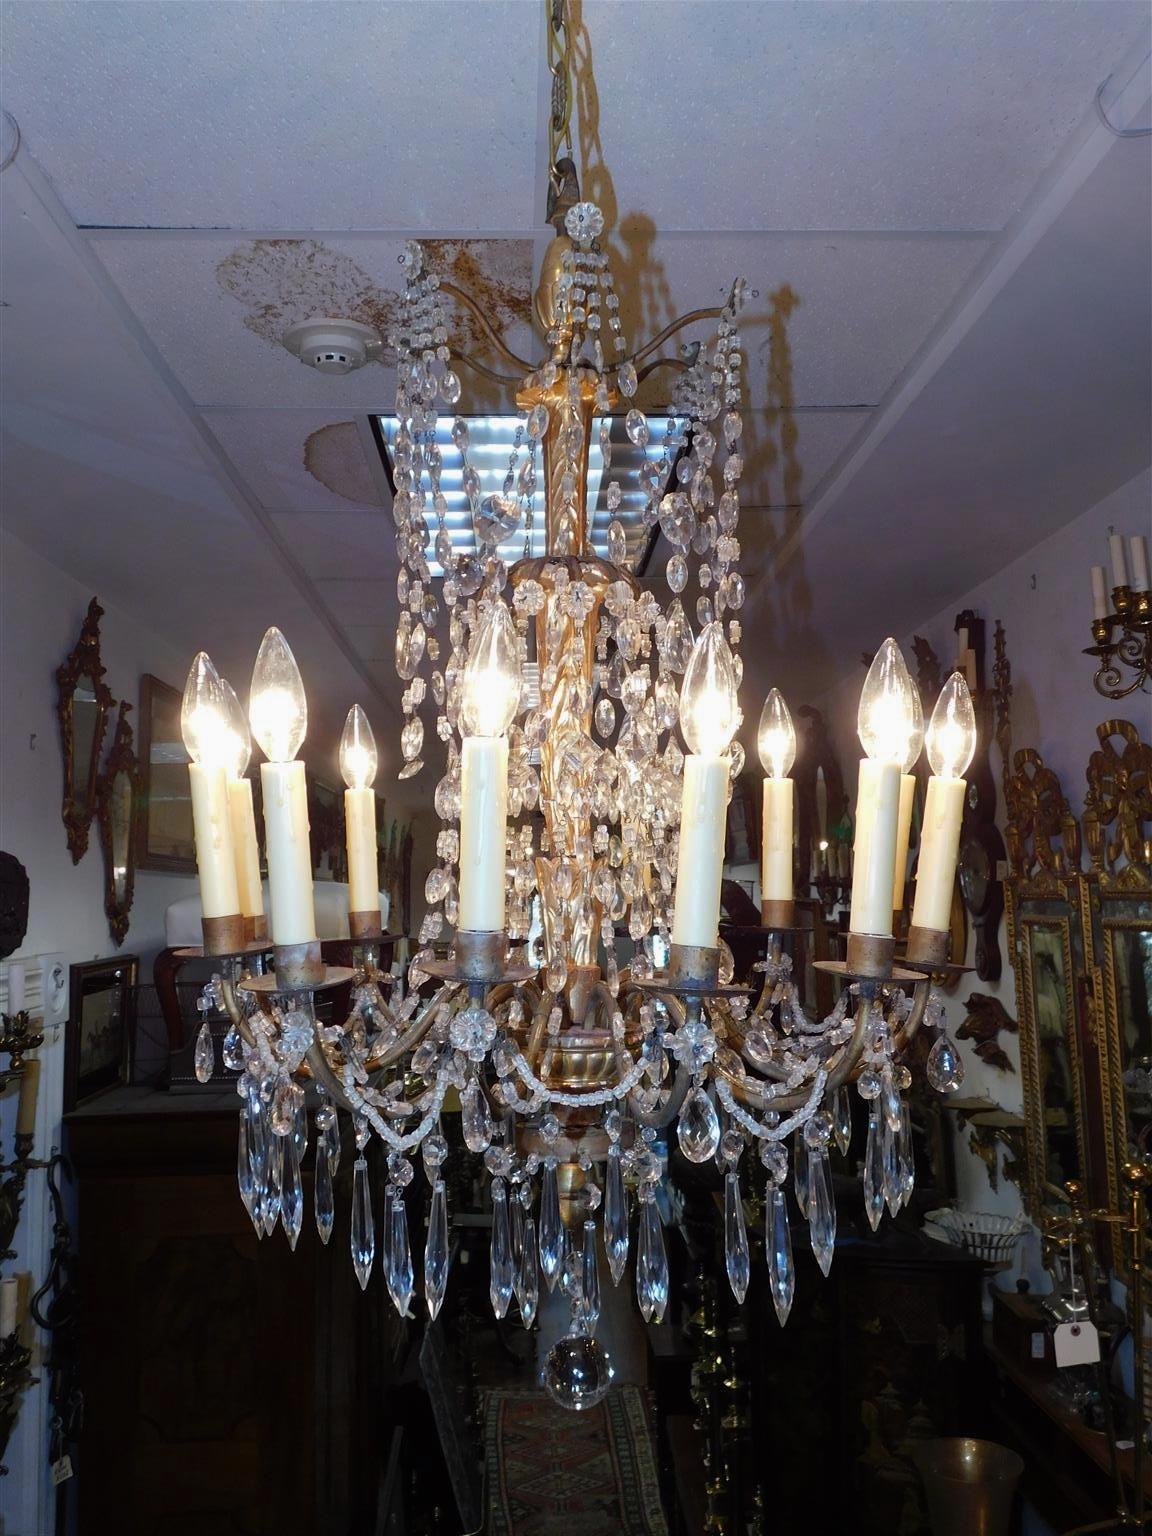 Italian gilt carved wood and crystal ten light bronze arms chandelier. Originally candle powered and has been electrified. Late 18th Century